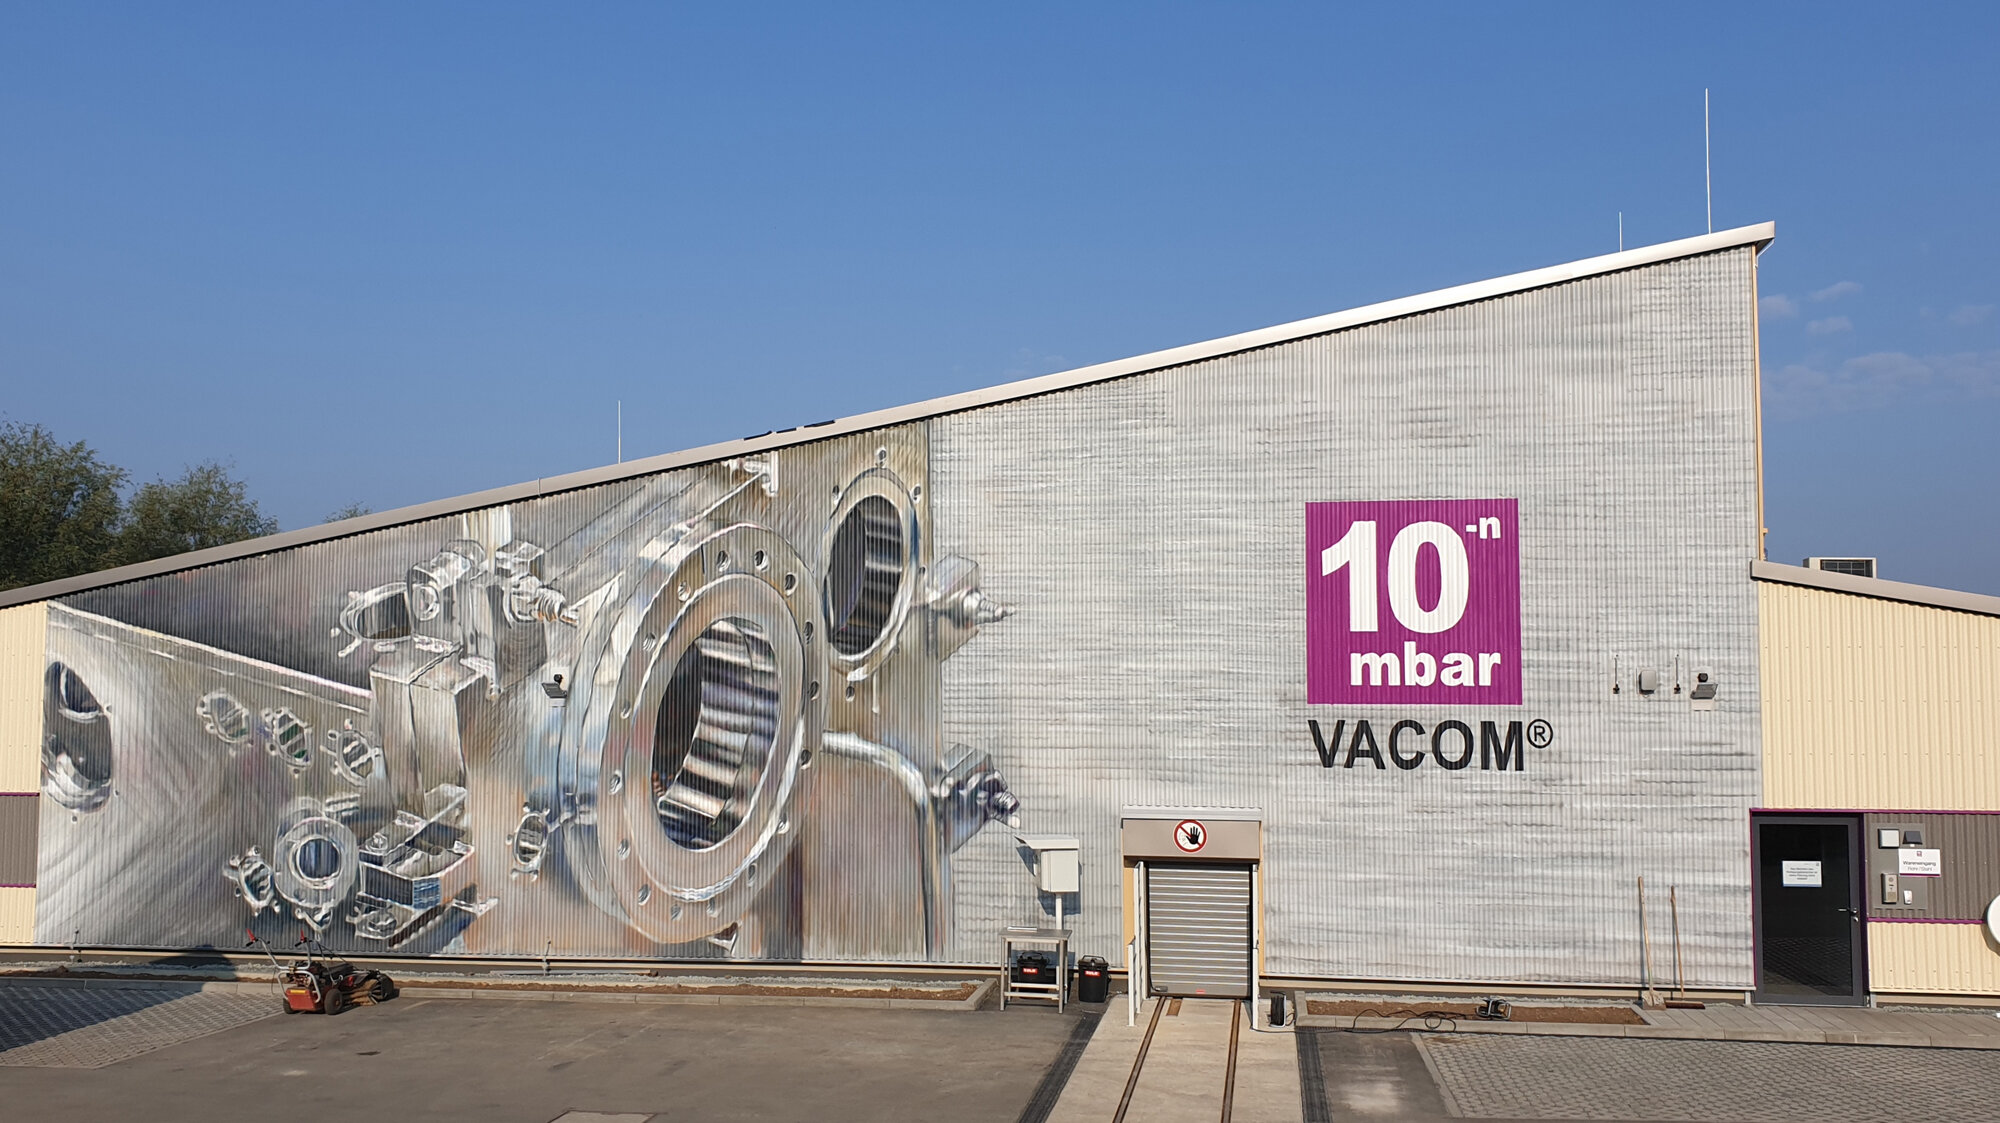 Image about VACOM; Exterior facade with a chamber graffity on the production hall.